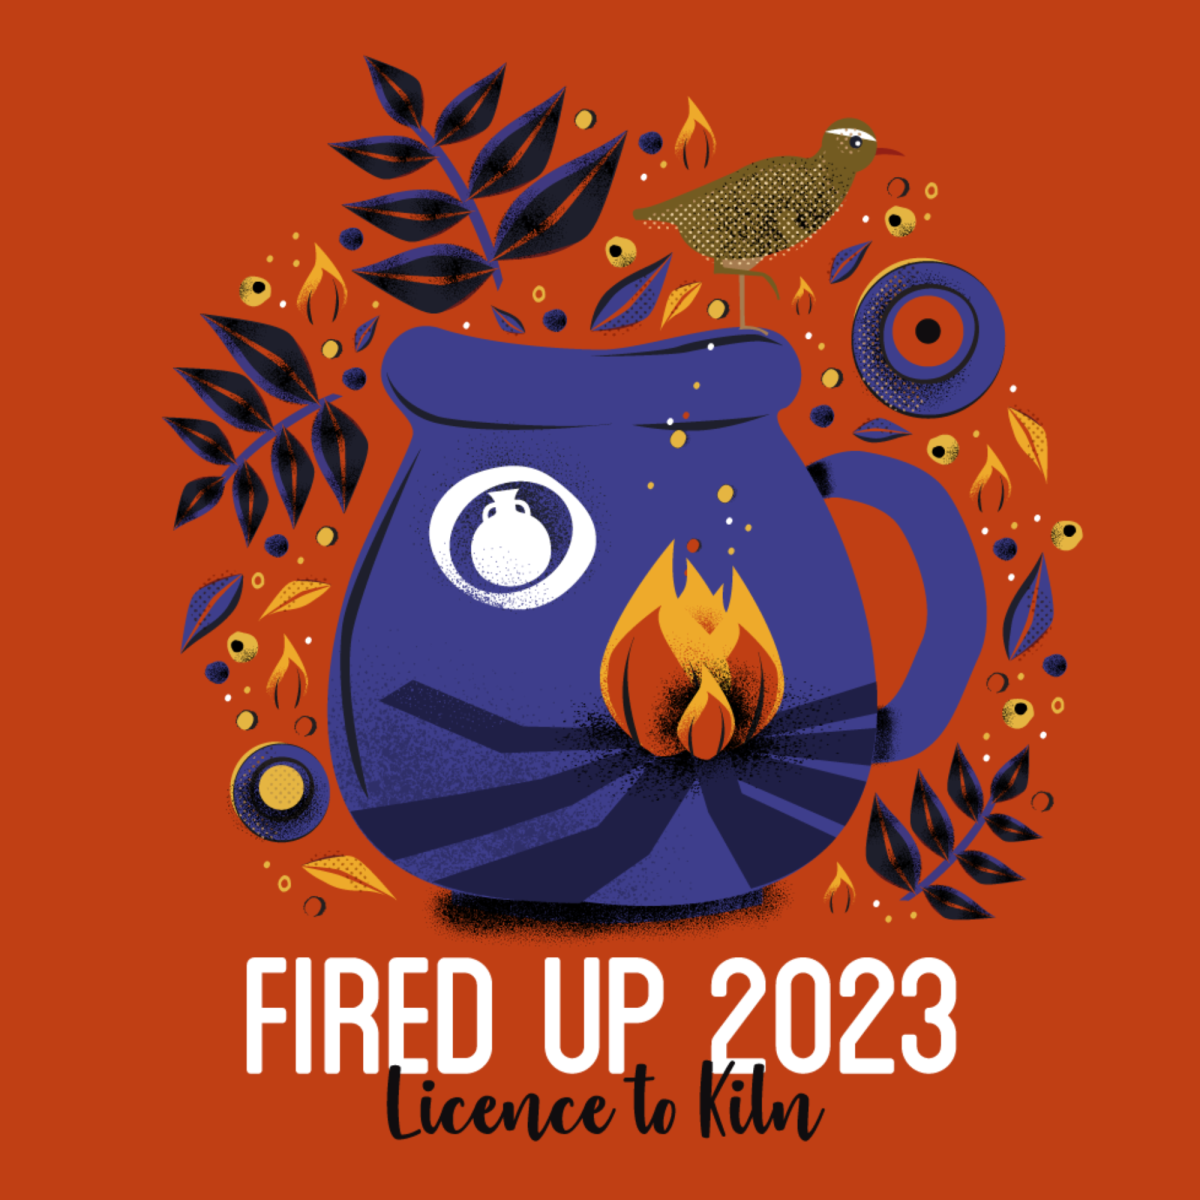 Fired Up 2023: Licence to Kiln. 